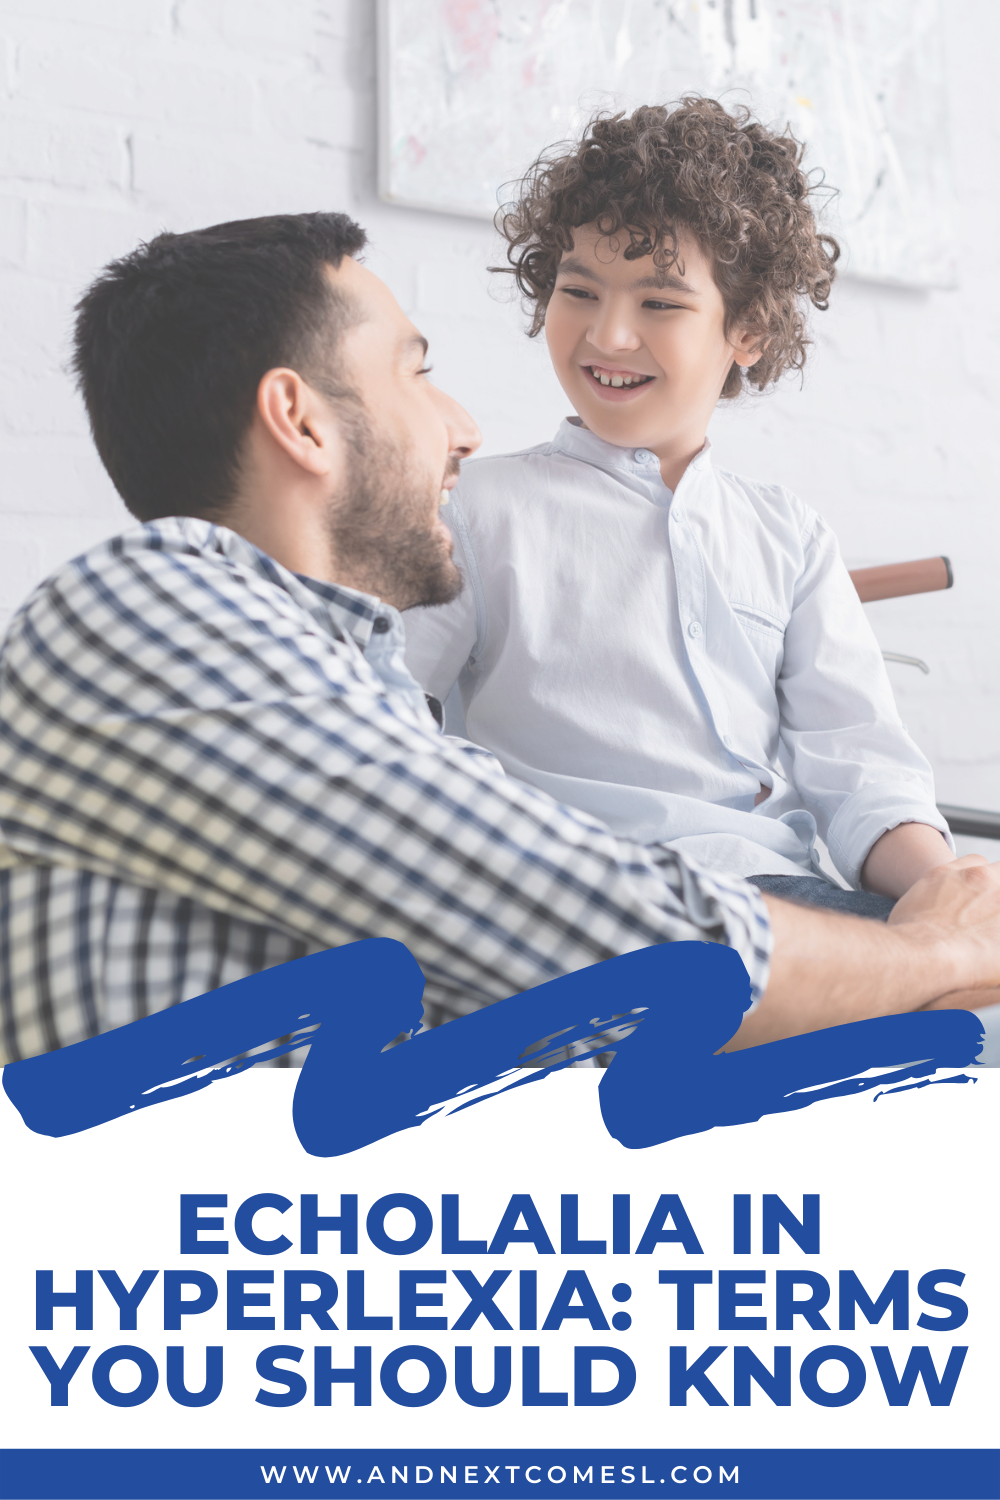 Echolalia in hyperlexia: A look at what echolalia is, the different types of echolalia, and its role in hyperlexia